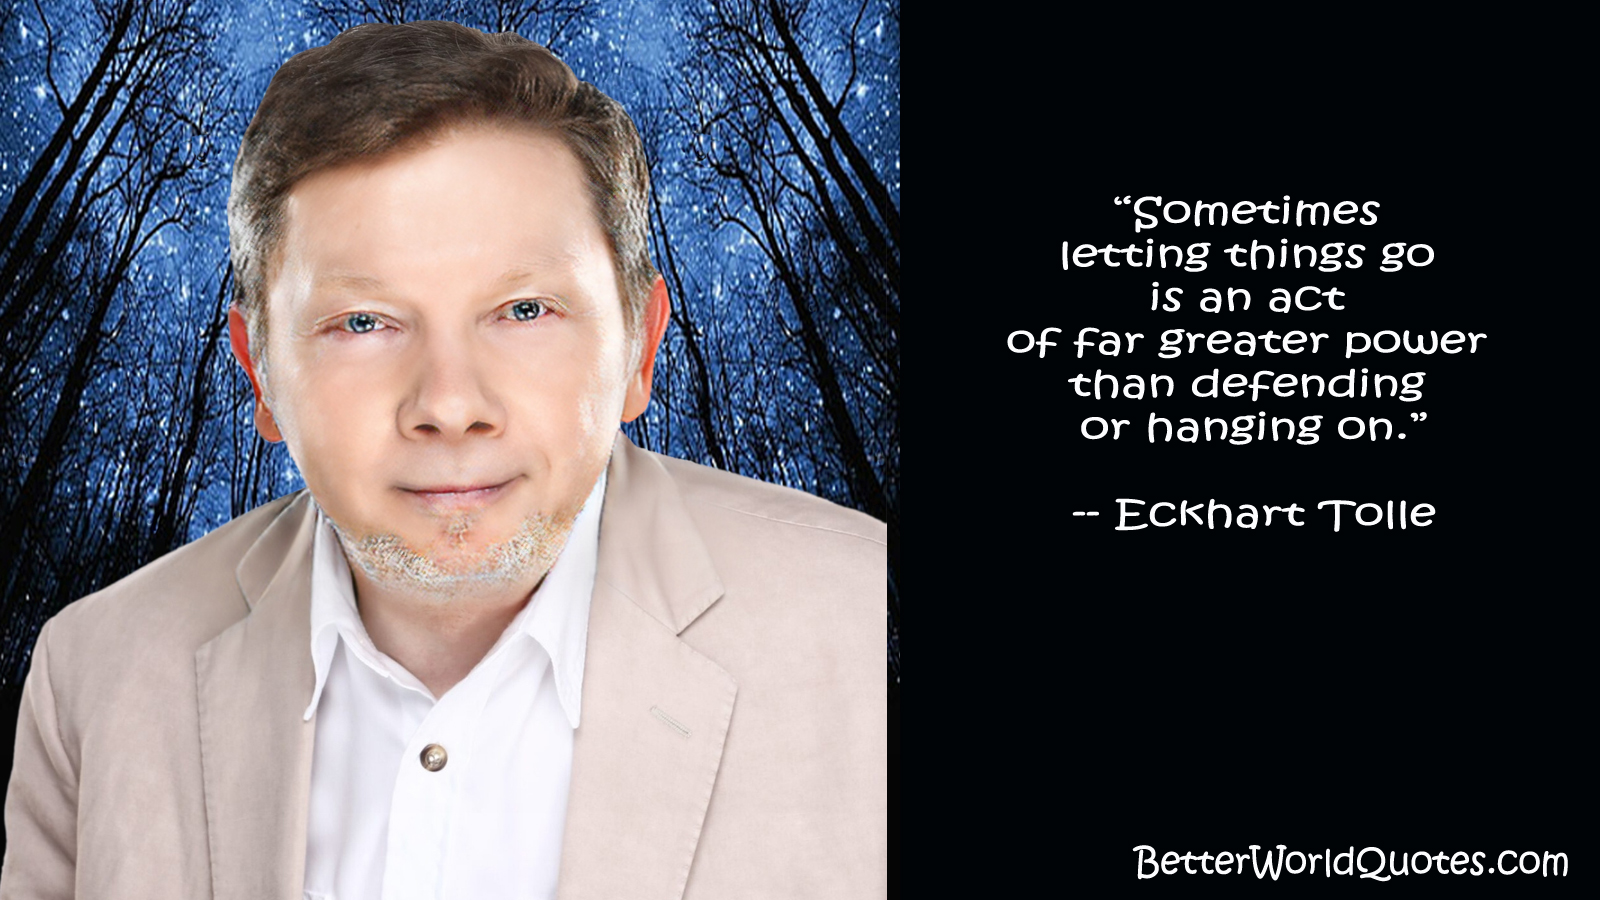 Eckhart Tolle: Sometimes letting things go is an act of far greater power than defending or hanging on.